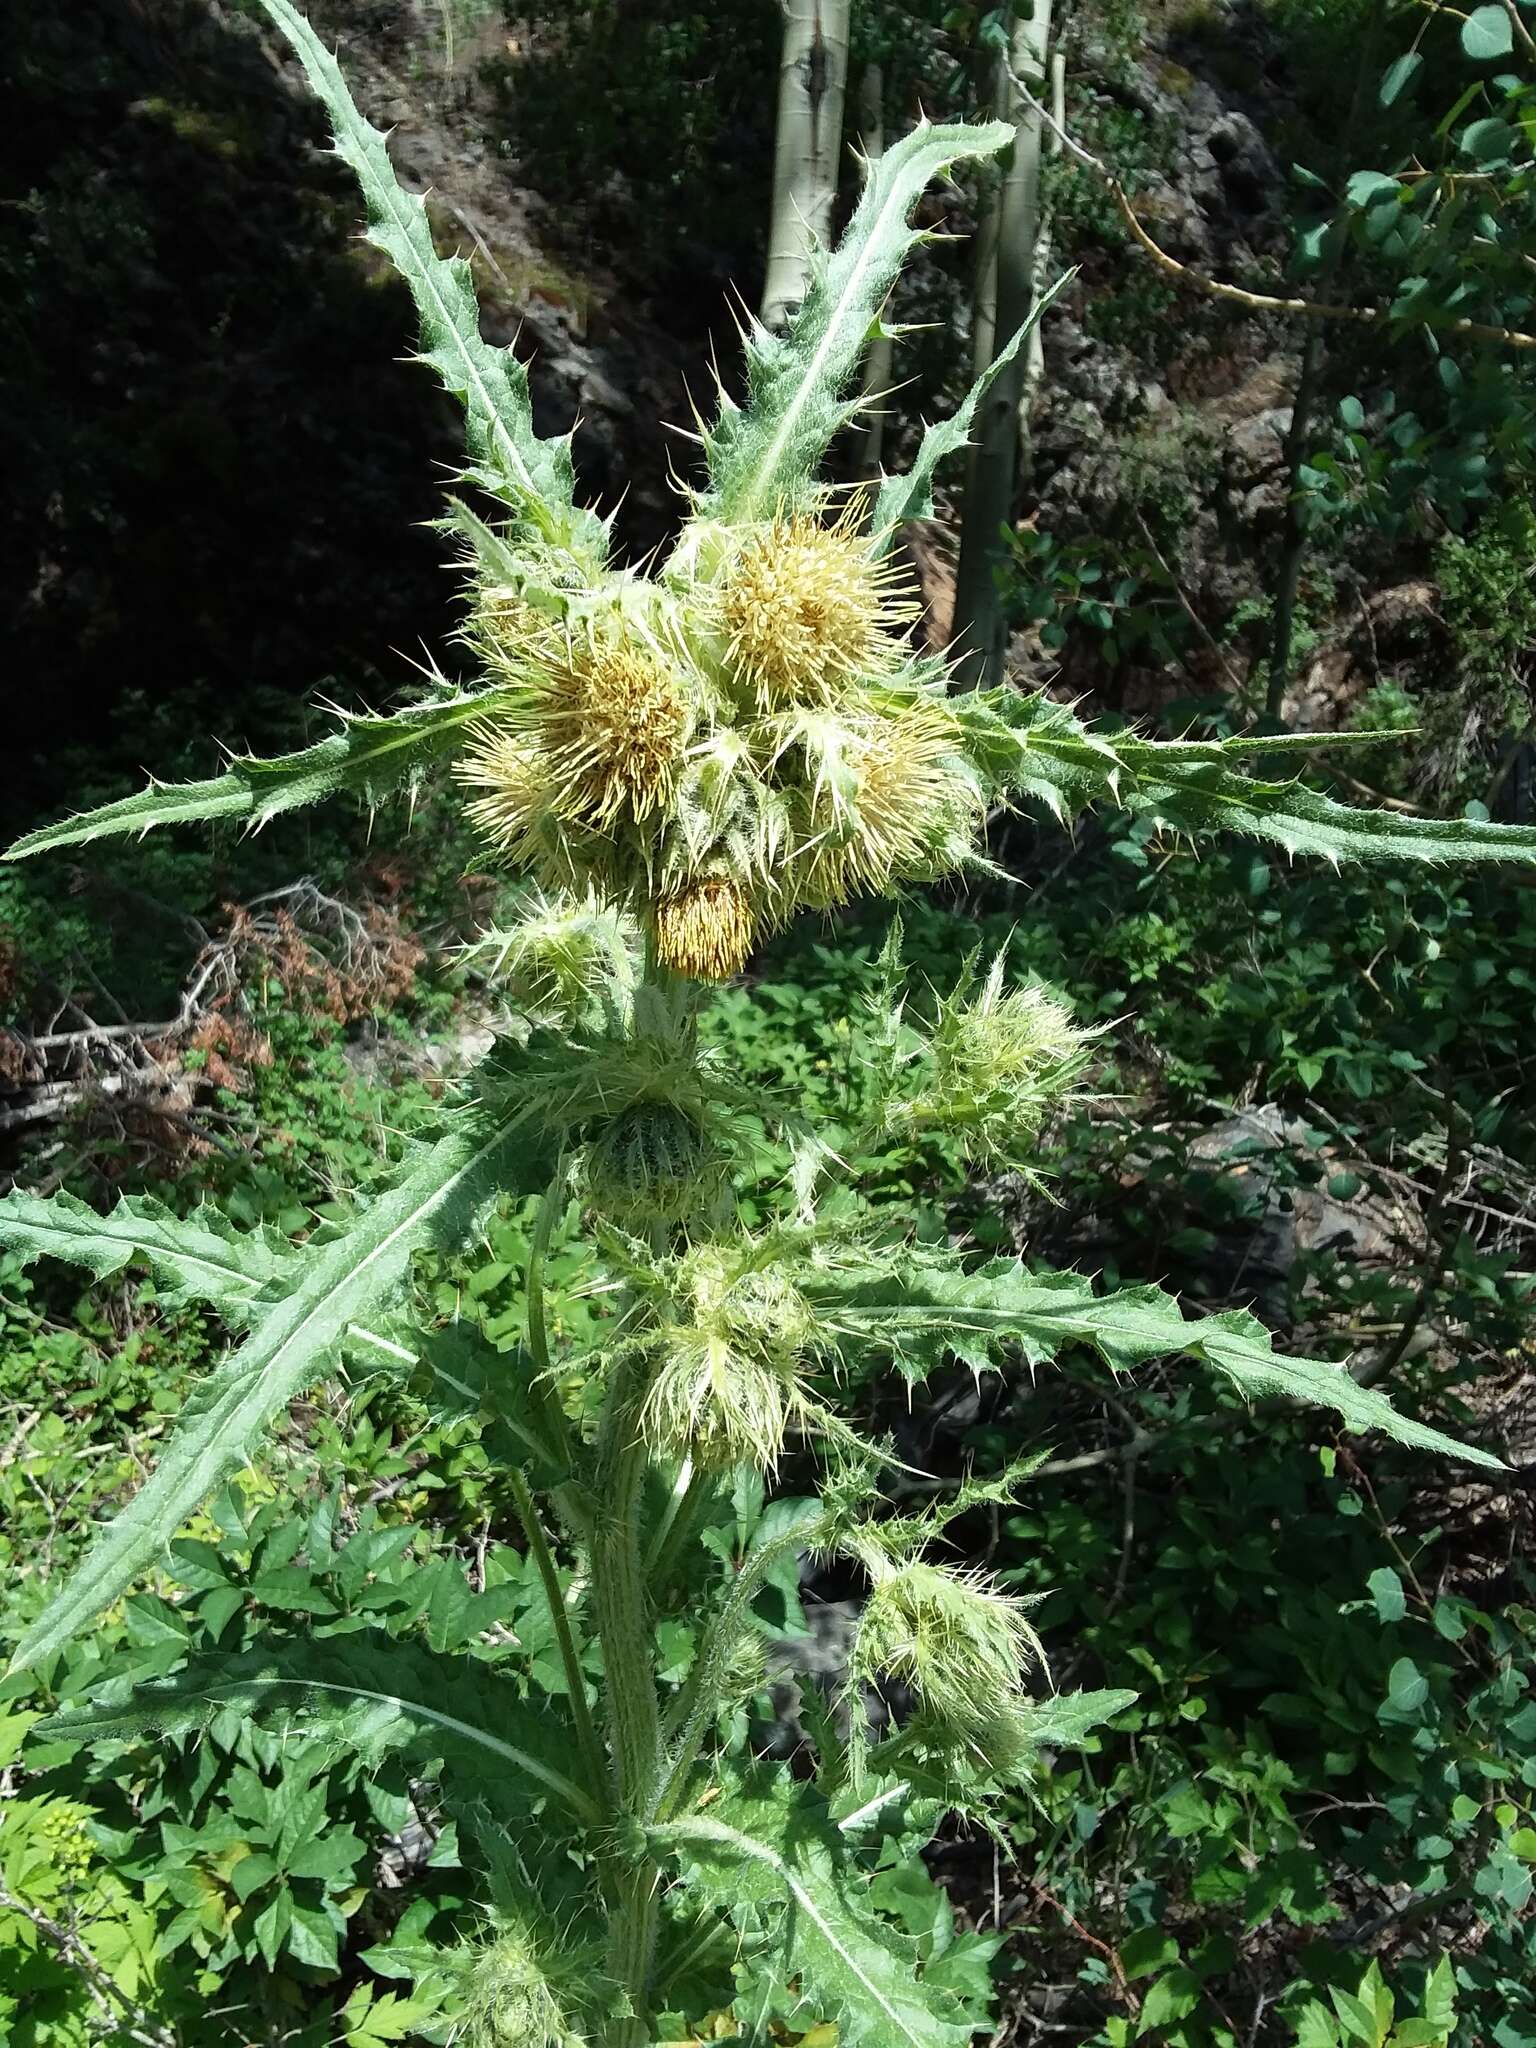 Image of Parry's thistle